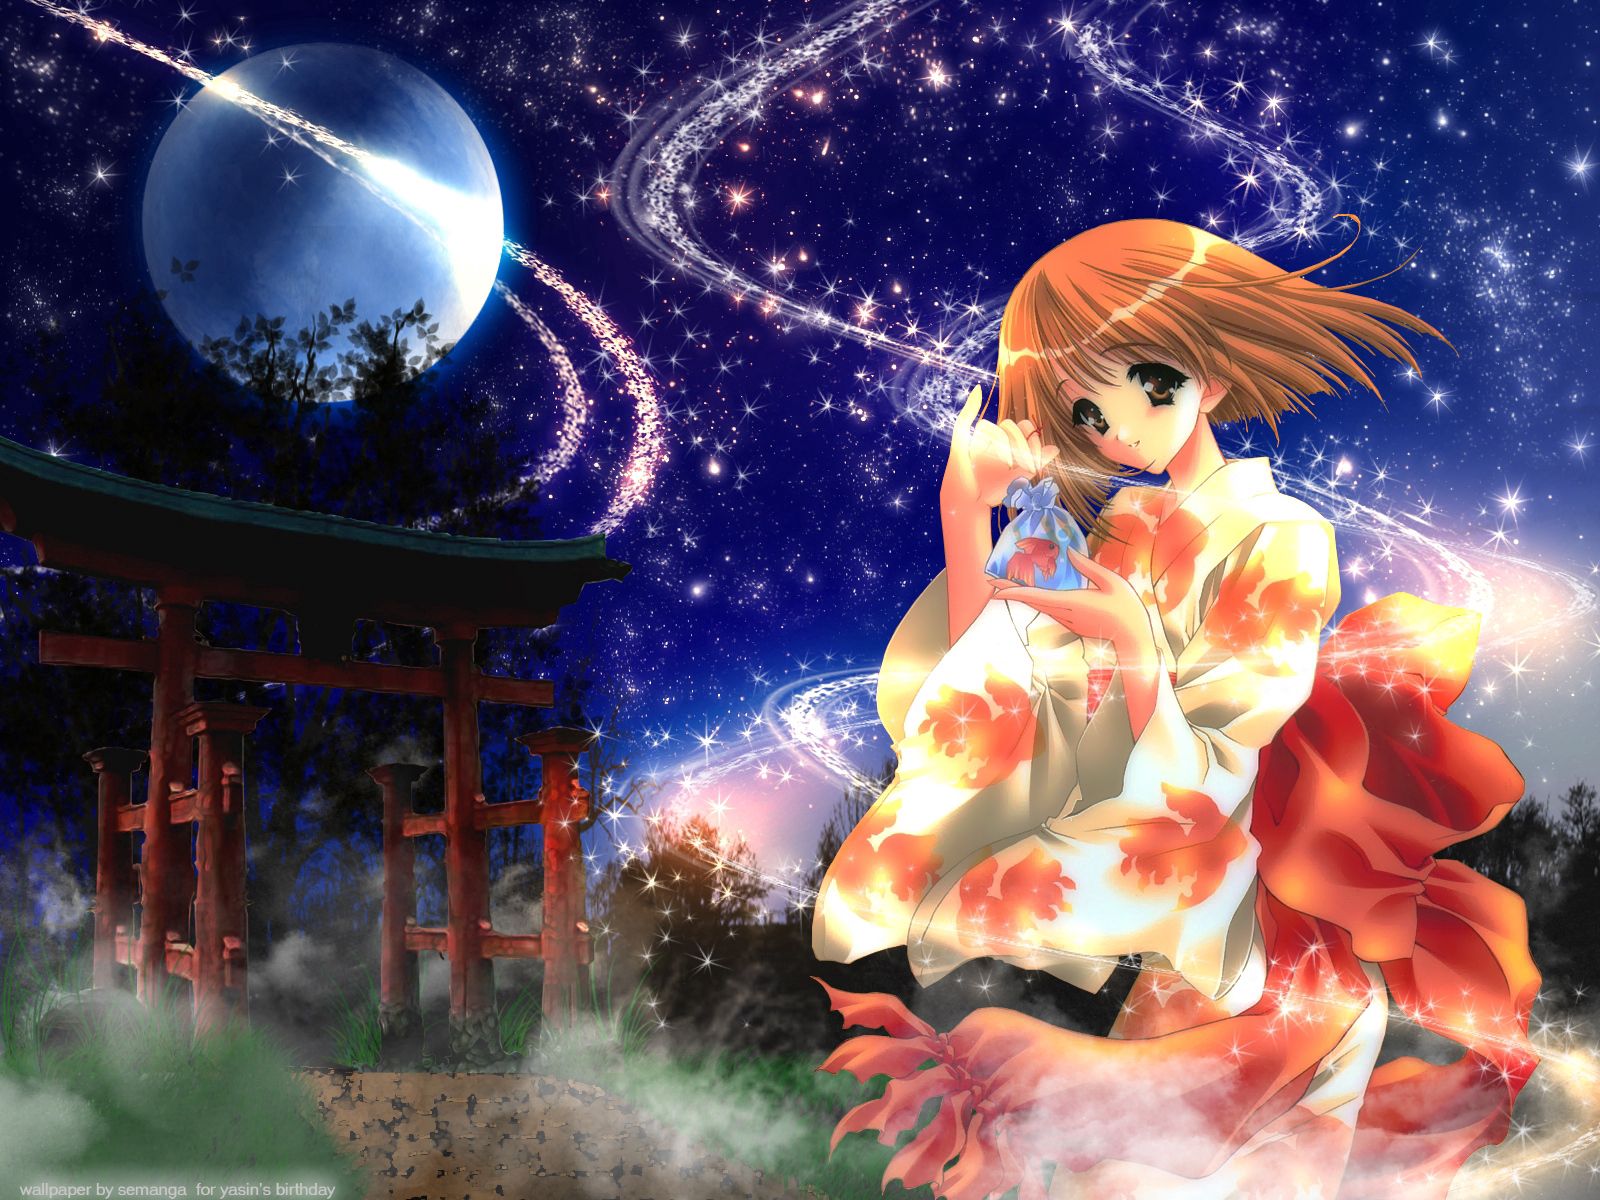 136844 free wallpaper 240x320 for phone, download images shining, kimono, anime, girl 240x320 for mobile